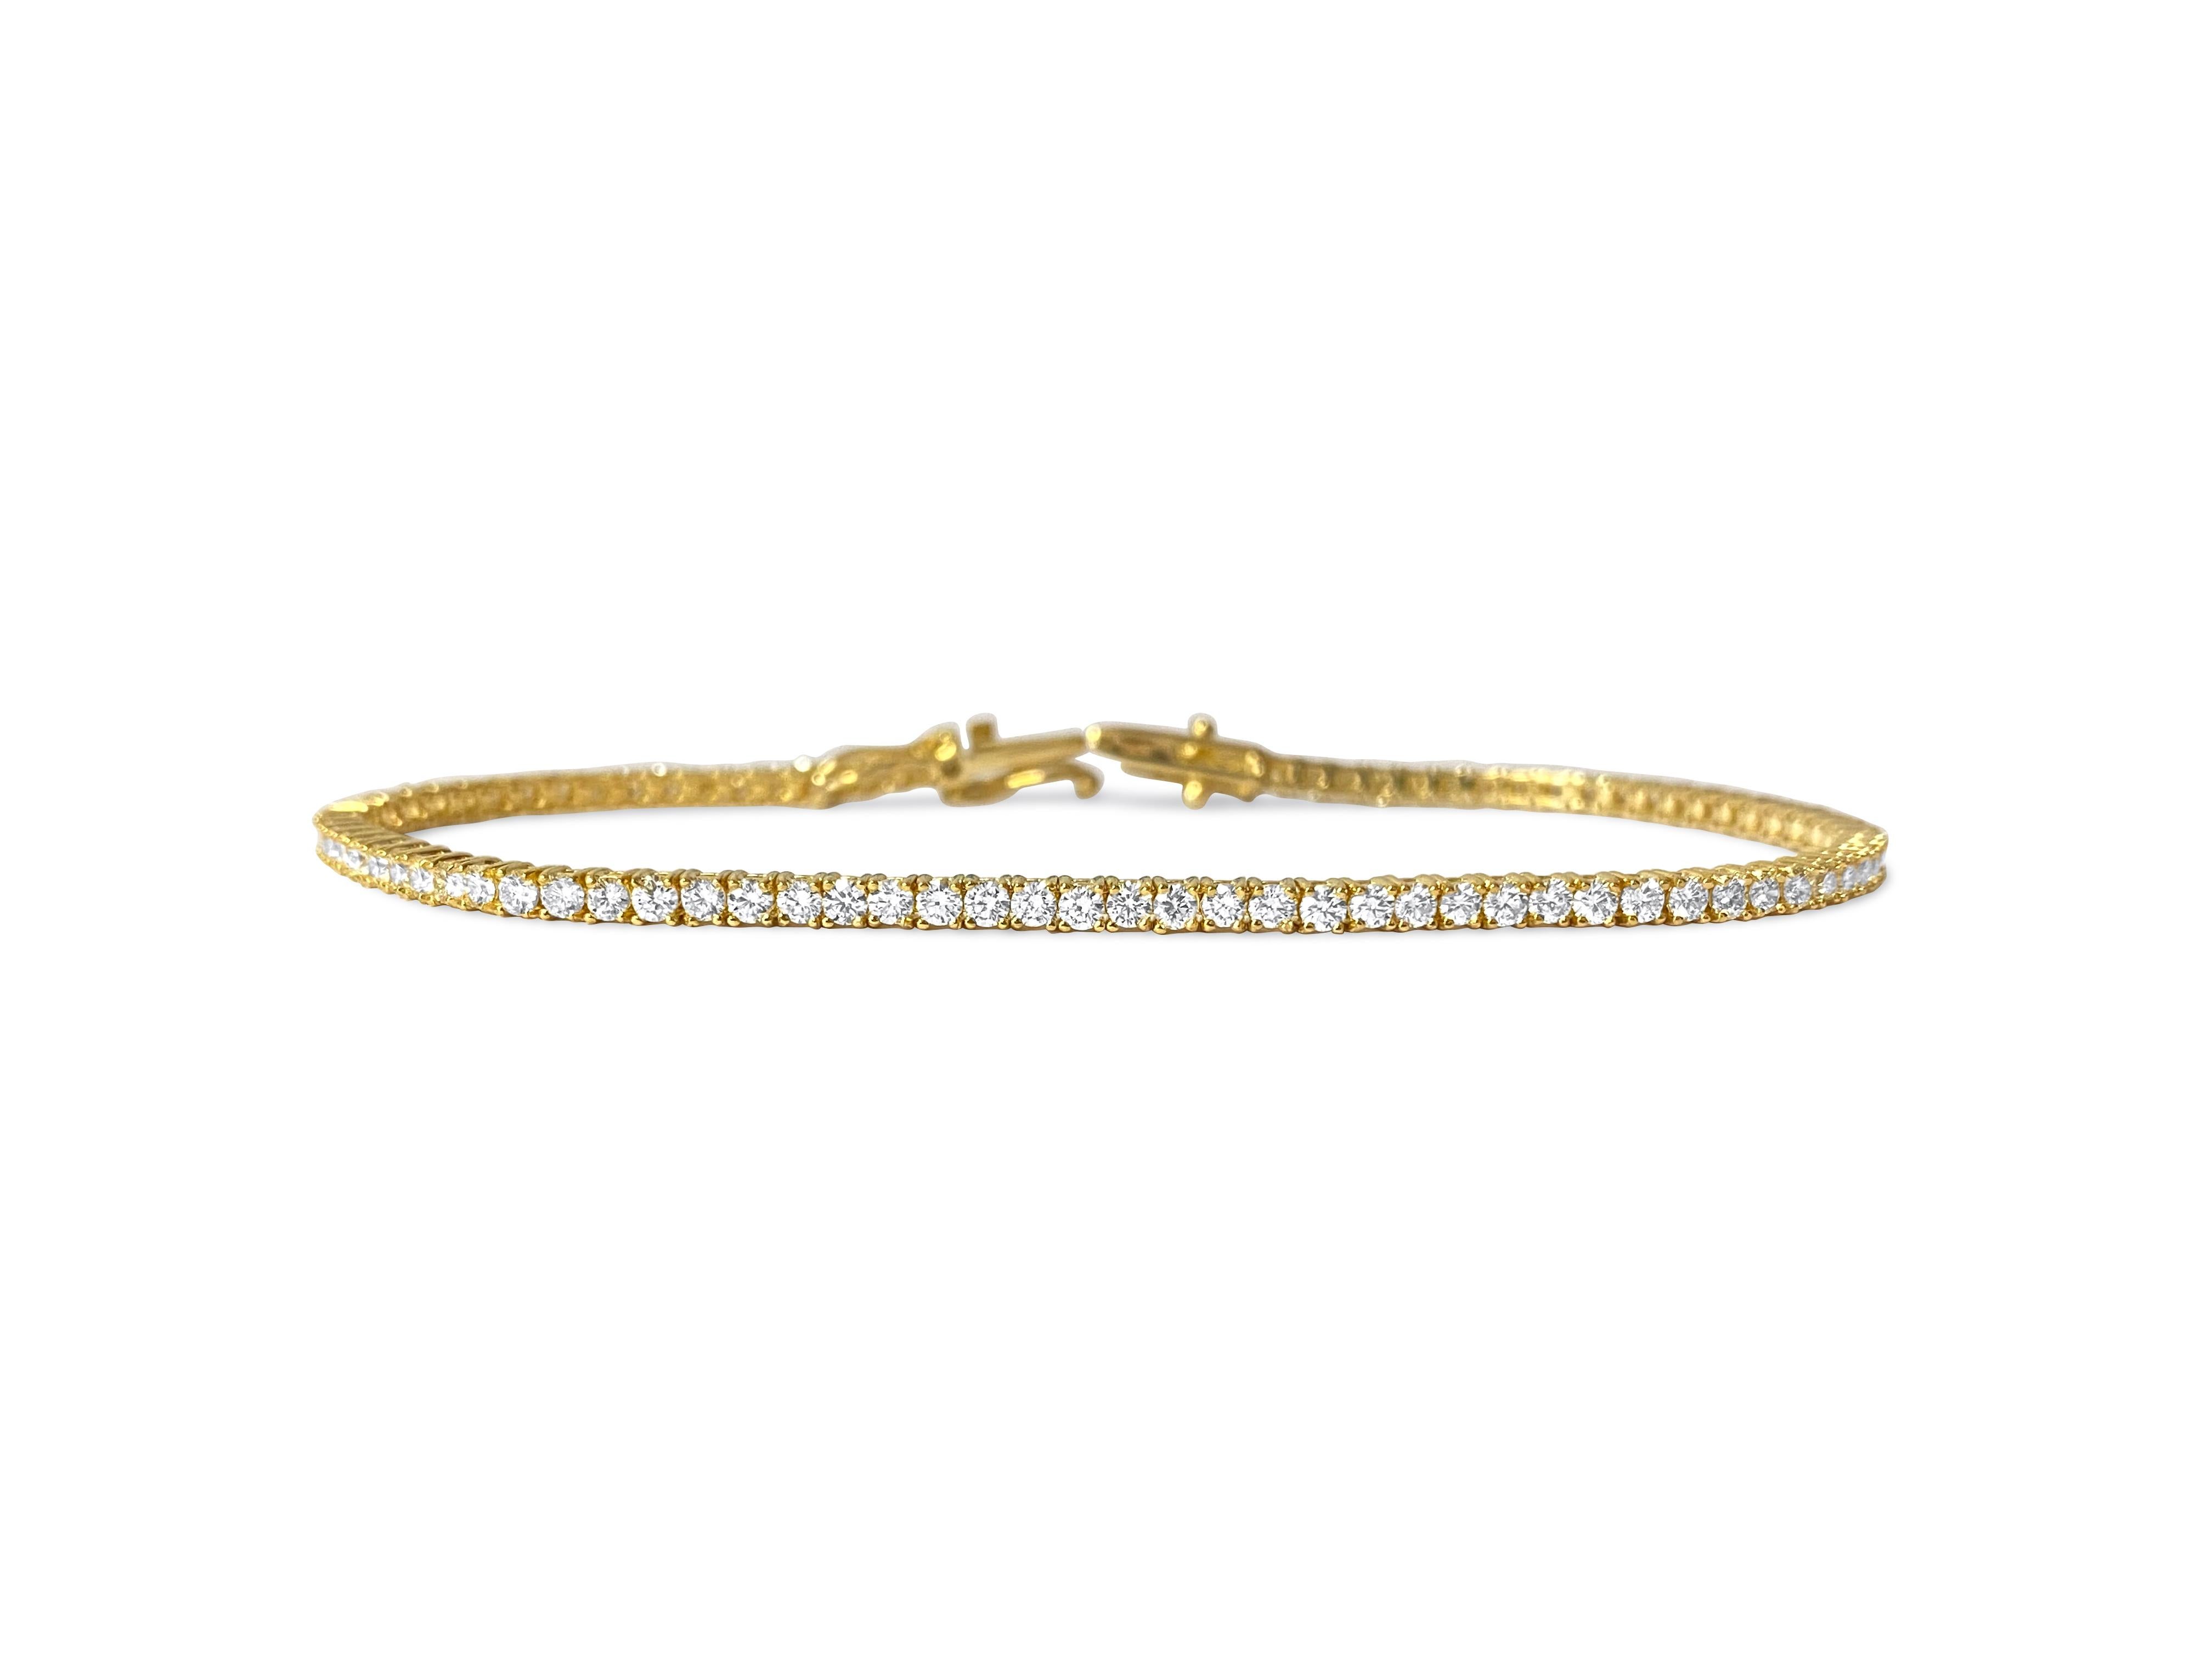 Metal: 10k yellow gold. 
Diamonds: 3.08cwt. 
VVS clarity. H color. 100% natural earth mined diamonds. Round brilliant cut set in prongs. Gorgeous finish and shine. Top of the line unisex diamond tennis bracelet.